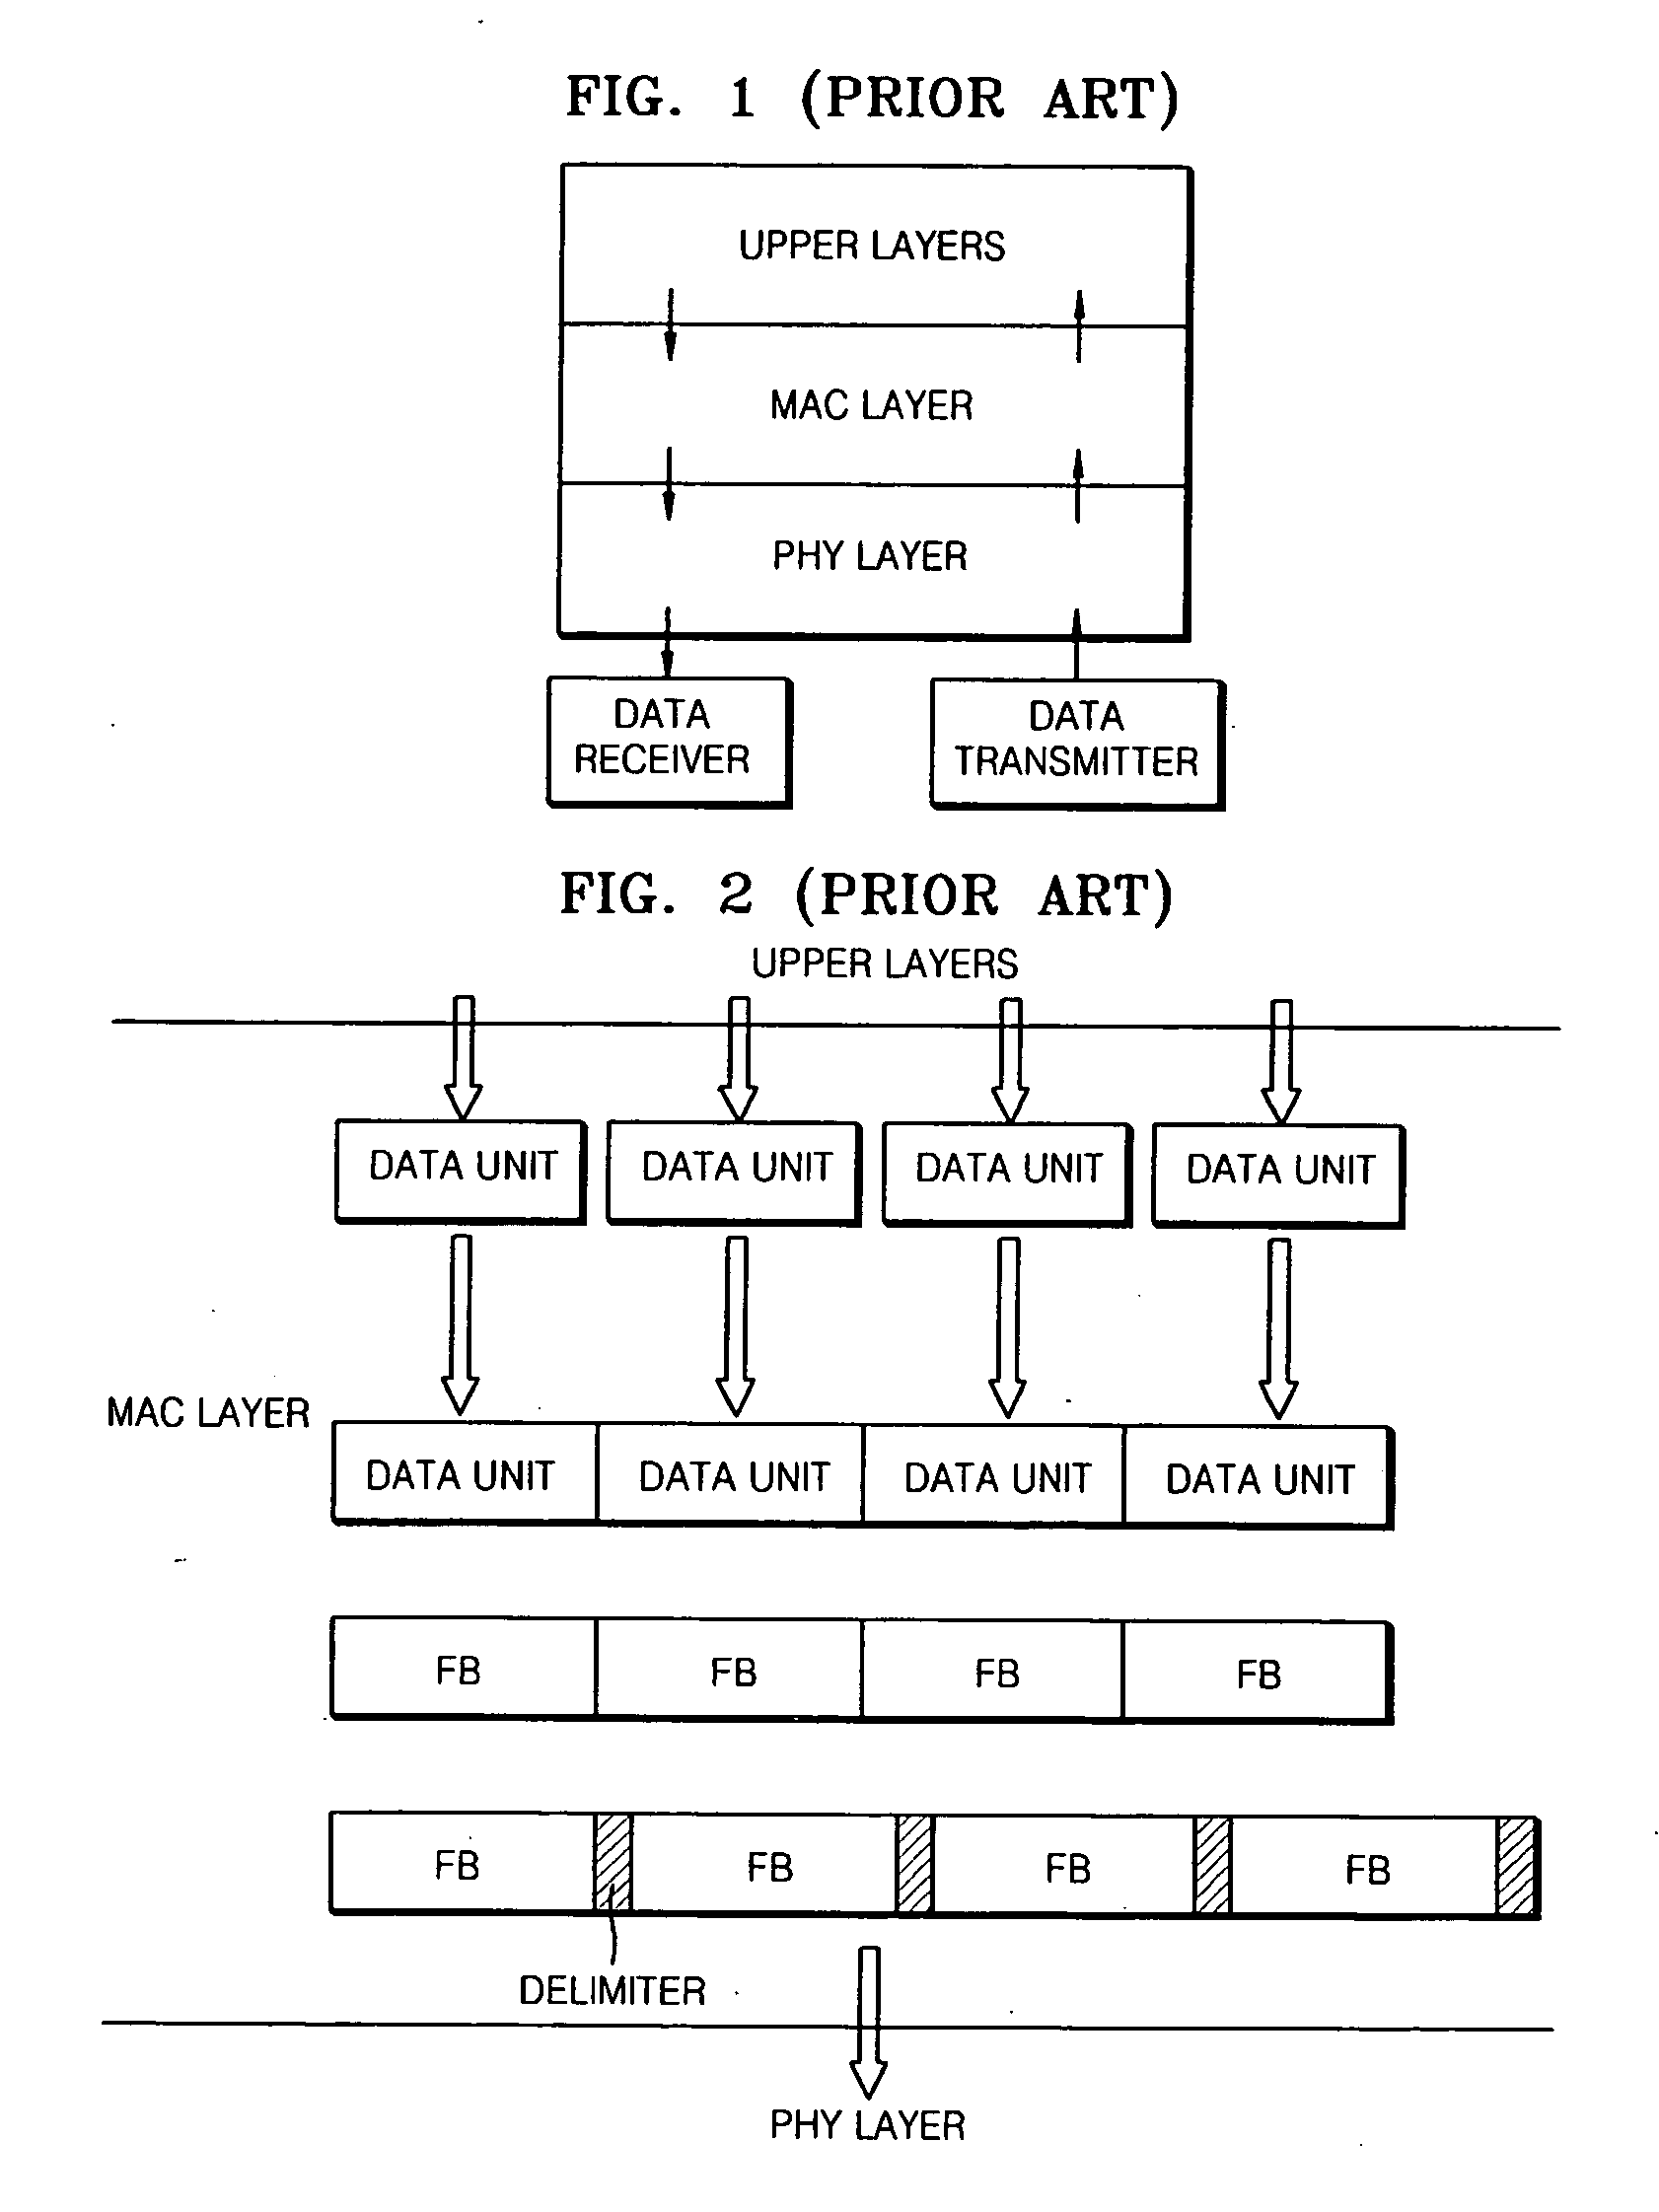 Method and apparatus to transmit data on PLC network by aggregating data